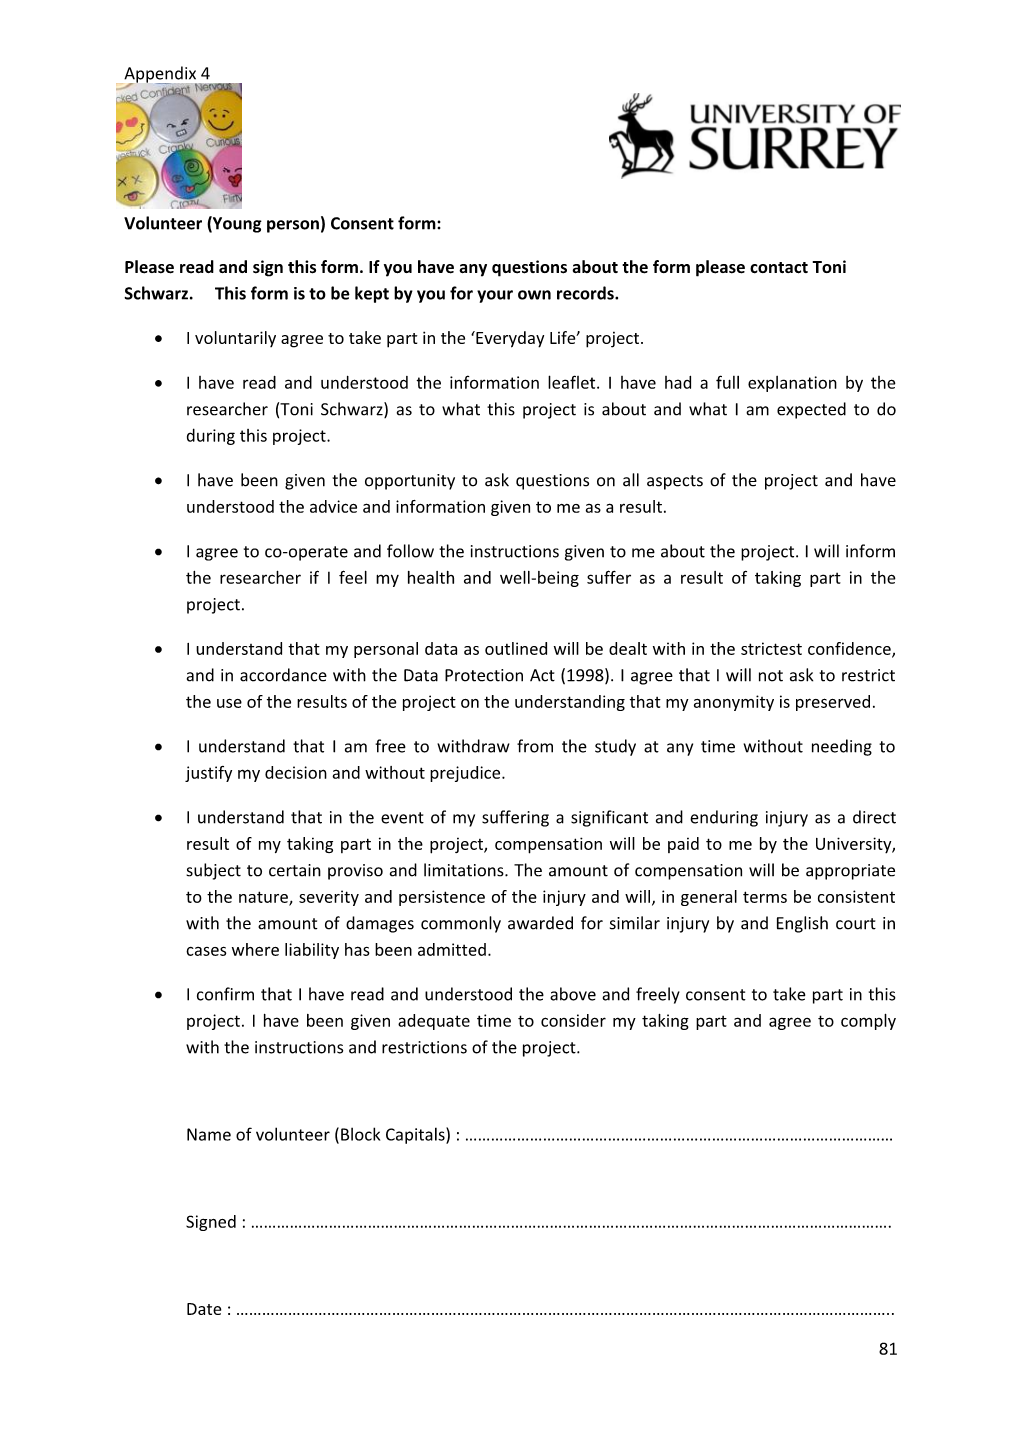 Volunteer (Young Person) Consent Form